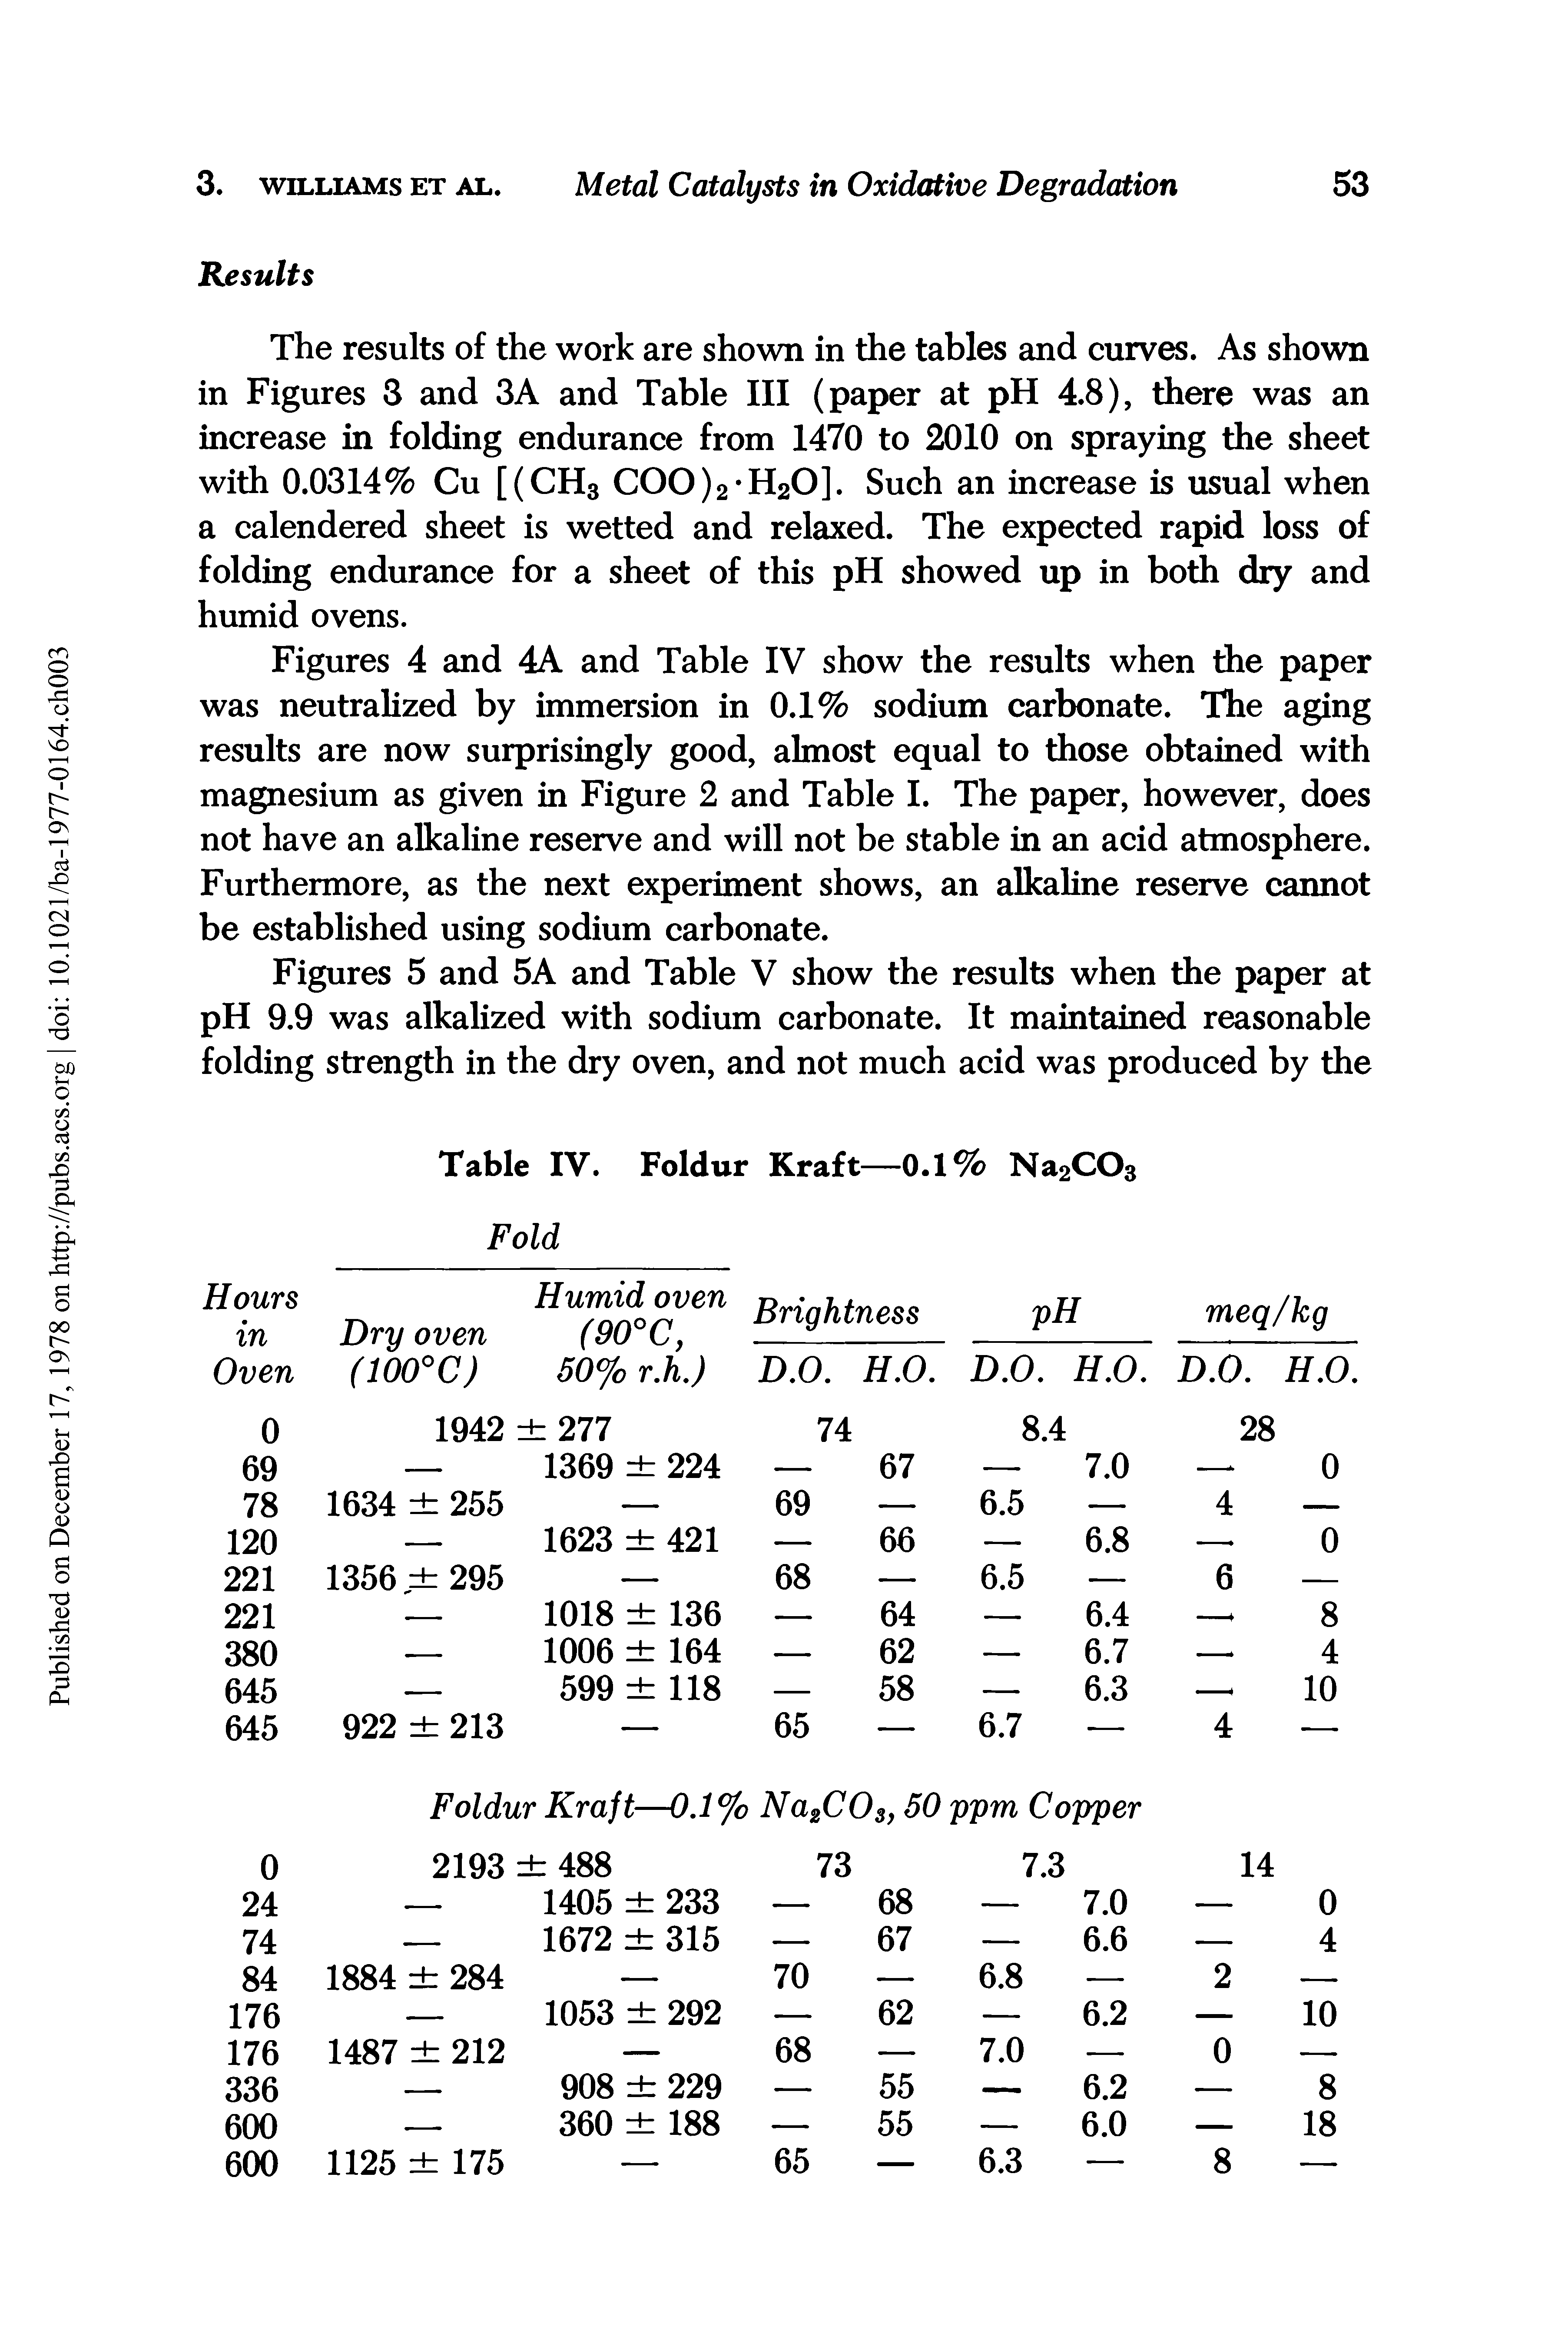 Figures 5 and 5A and Table V show the results when the paper at pH 9.9 was alkalized with sodium carbonate. It maintained reasonable folding strength in the dry oven, and not much acid was produced by the...